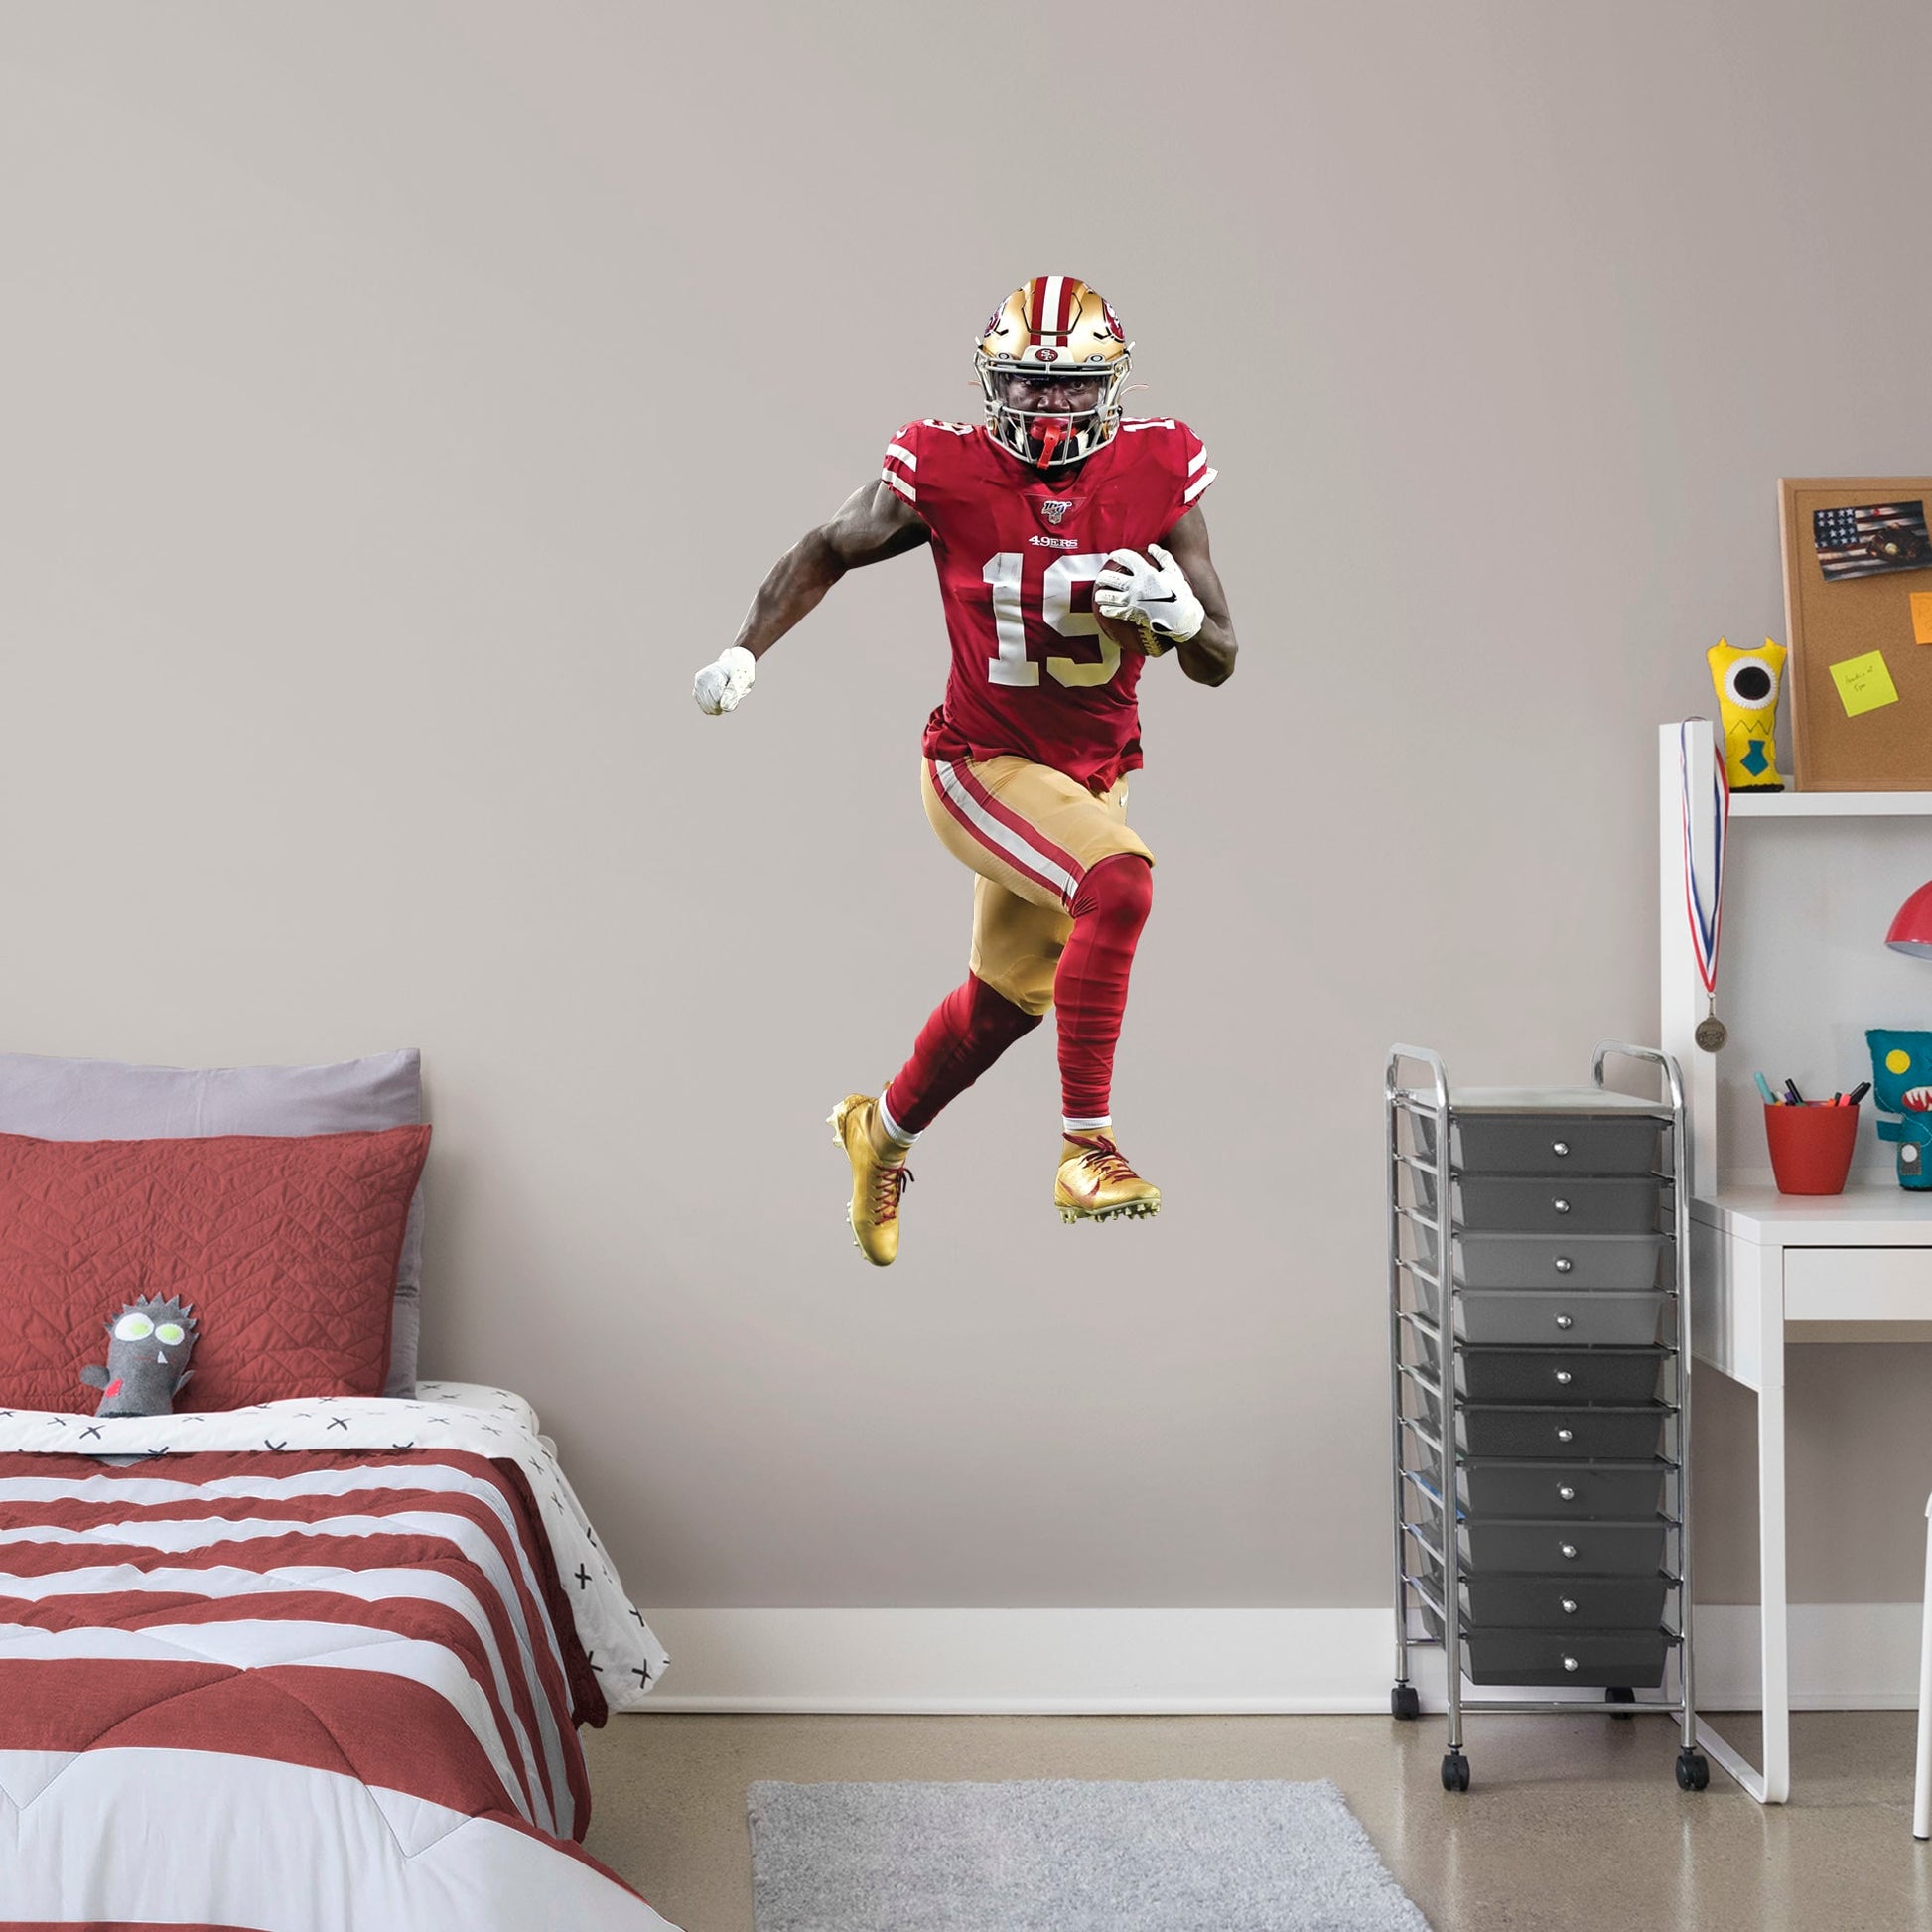 Giant Athlete + 2 Decals (28"W x 51"H) Deebo Samuel is one of the most exciting players in the NFL and you can show your support with this high-quality removable wall decal! Place this durable vinyl decal on any wall and wide receiver Deebo can dominate your room, office, or man cave like he helps the San Francisco 49ers dominate the league! This decal can be easily applied and removed on almost any surface, so this speedster can follow you everywhere you go! Let���s go, Niners!